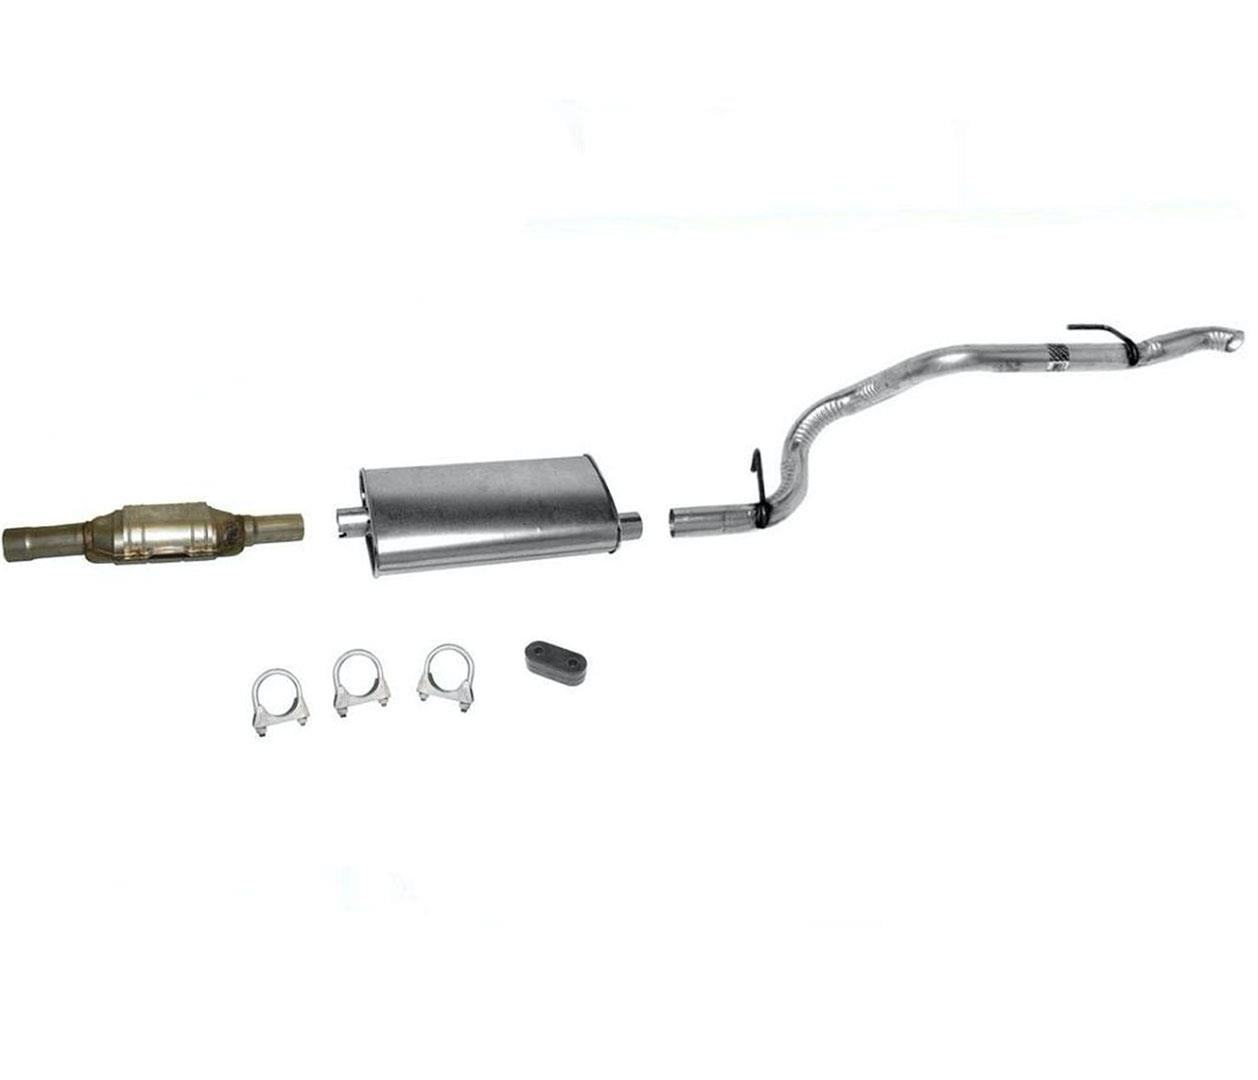 1996-1999 Jeep Cherokee 2.5L 4.0L Catalytic Converter muffler resonator tailpipe exhaust system kit fits 